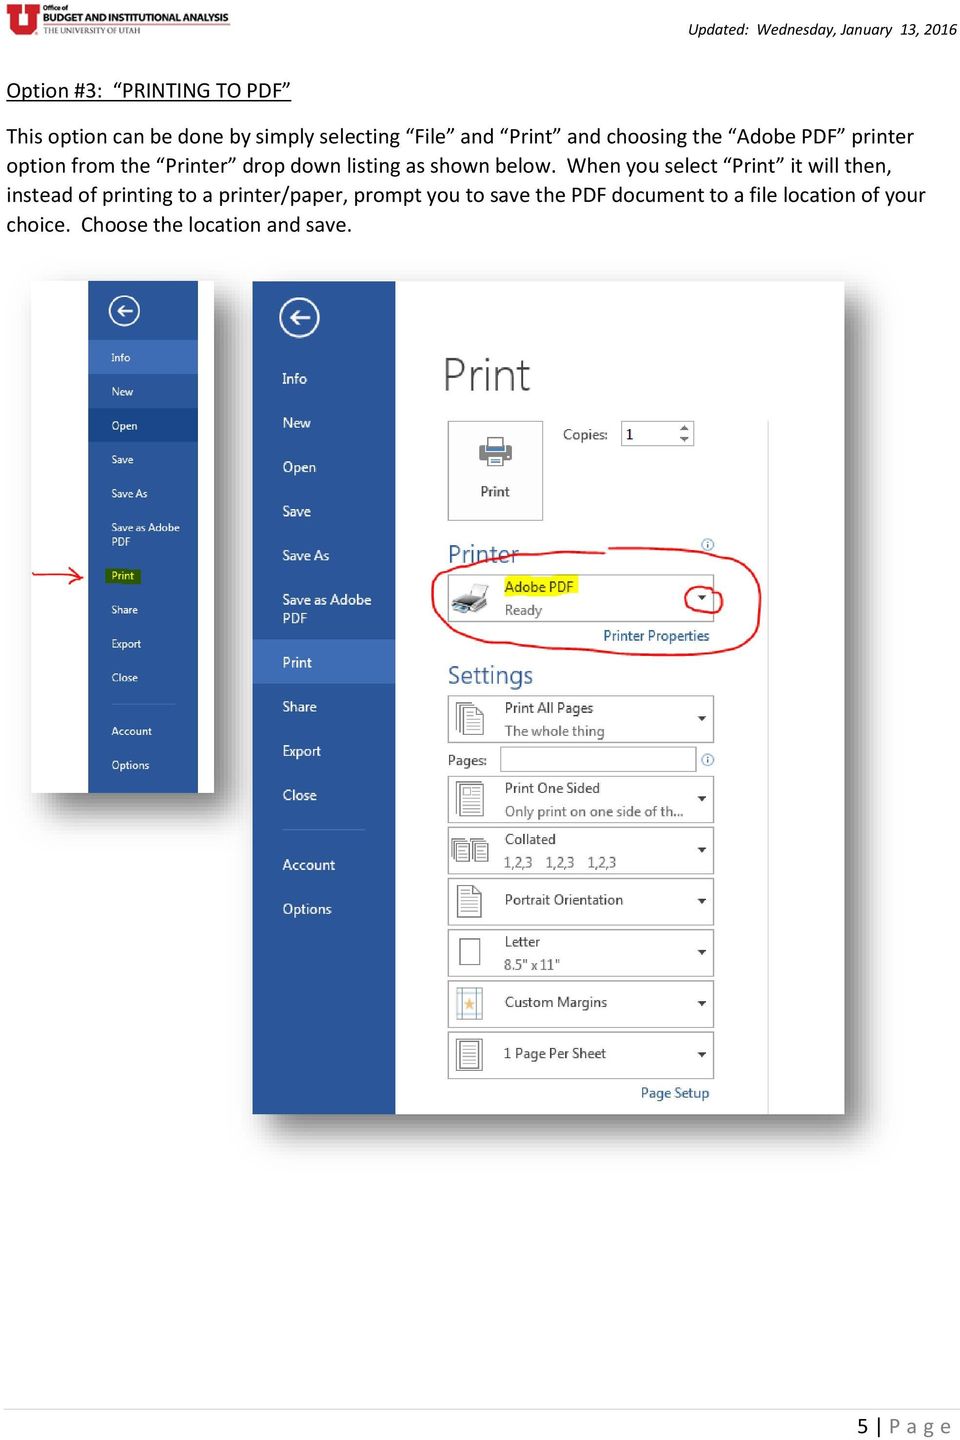 When you select Print it will then, instead of printing to a printer/paper, prompt you to